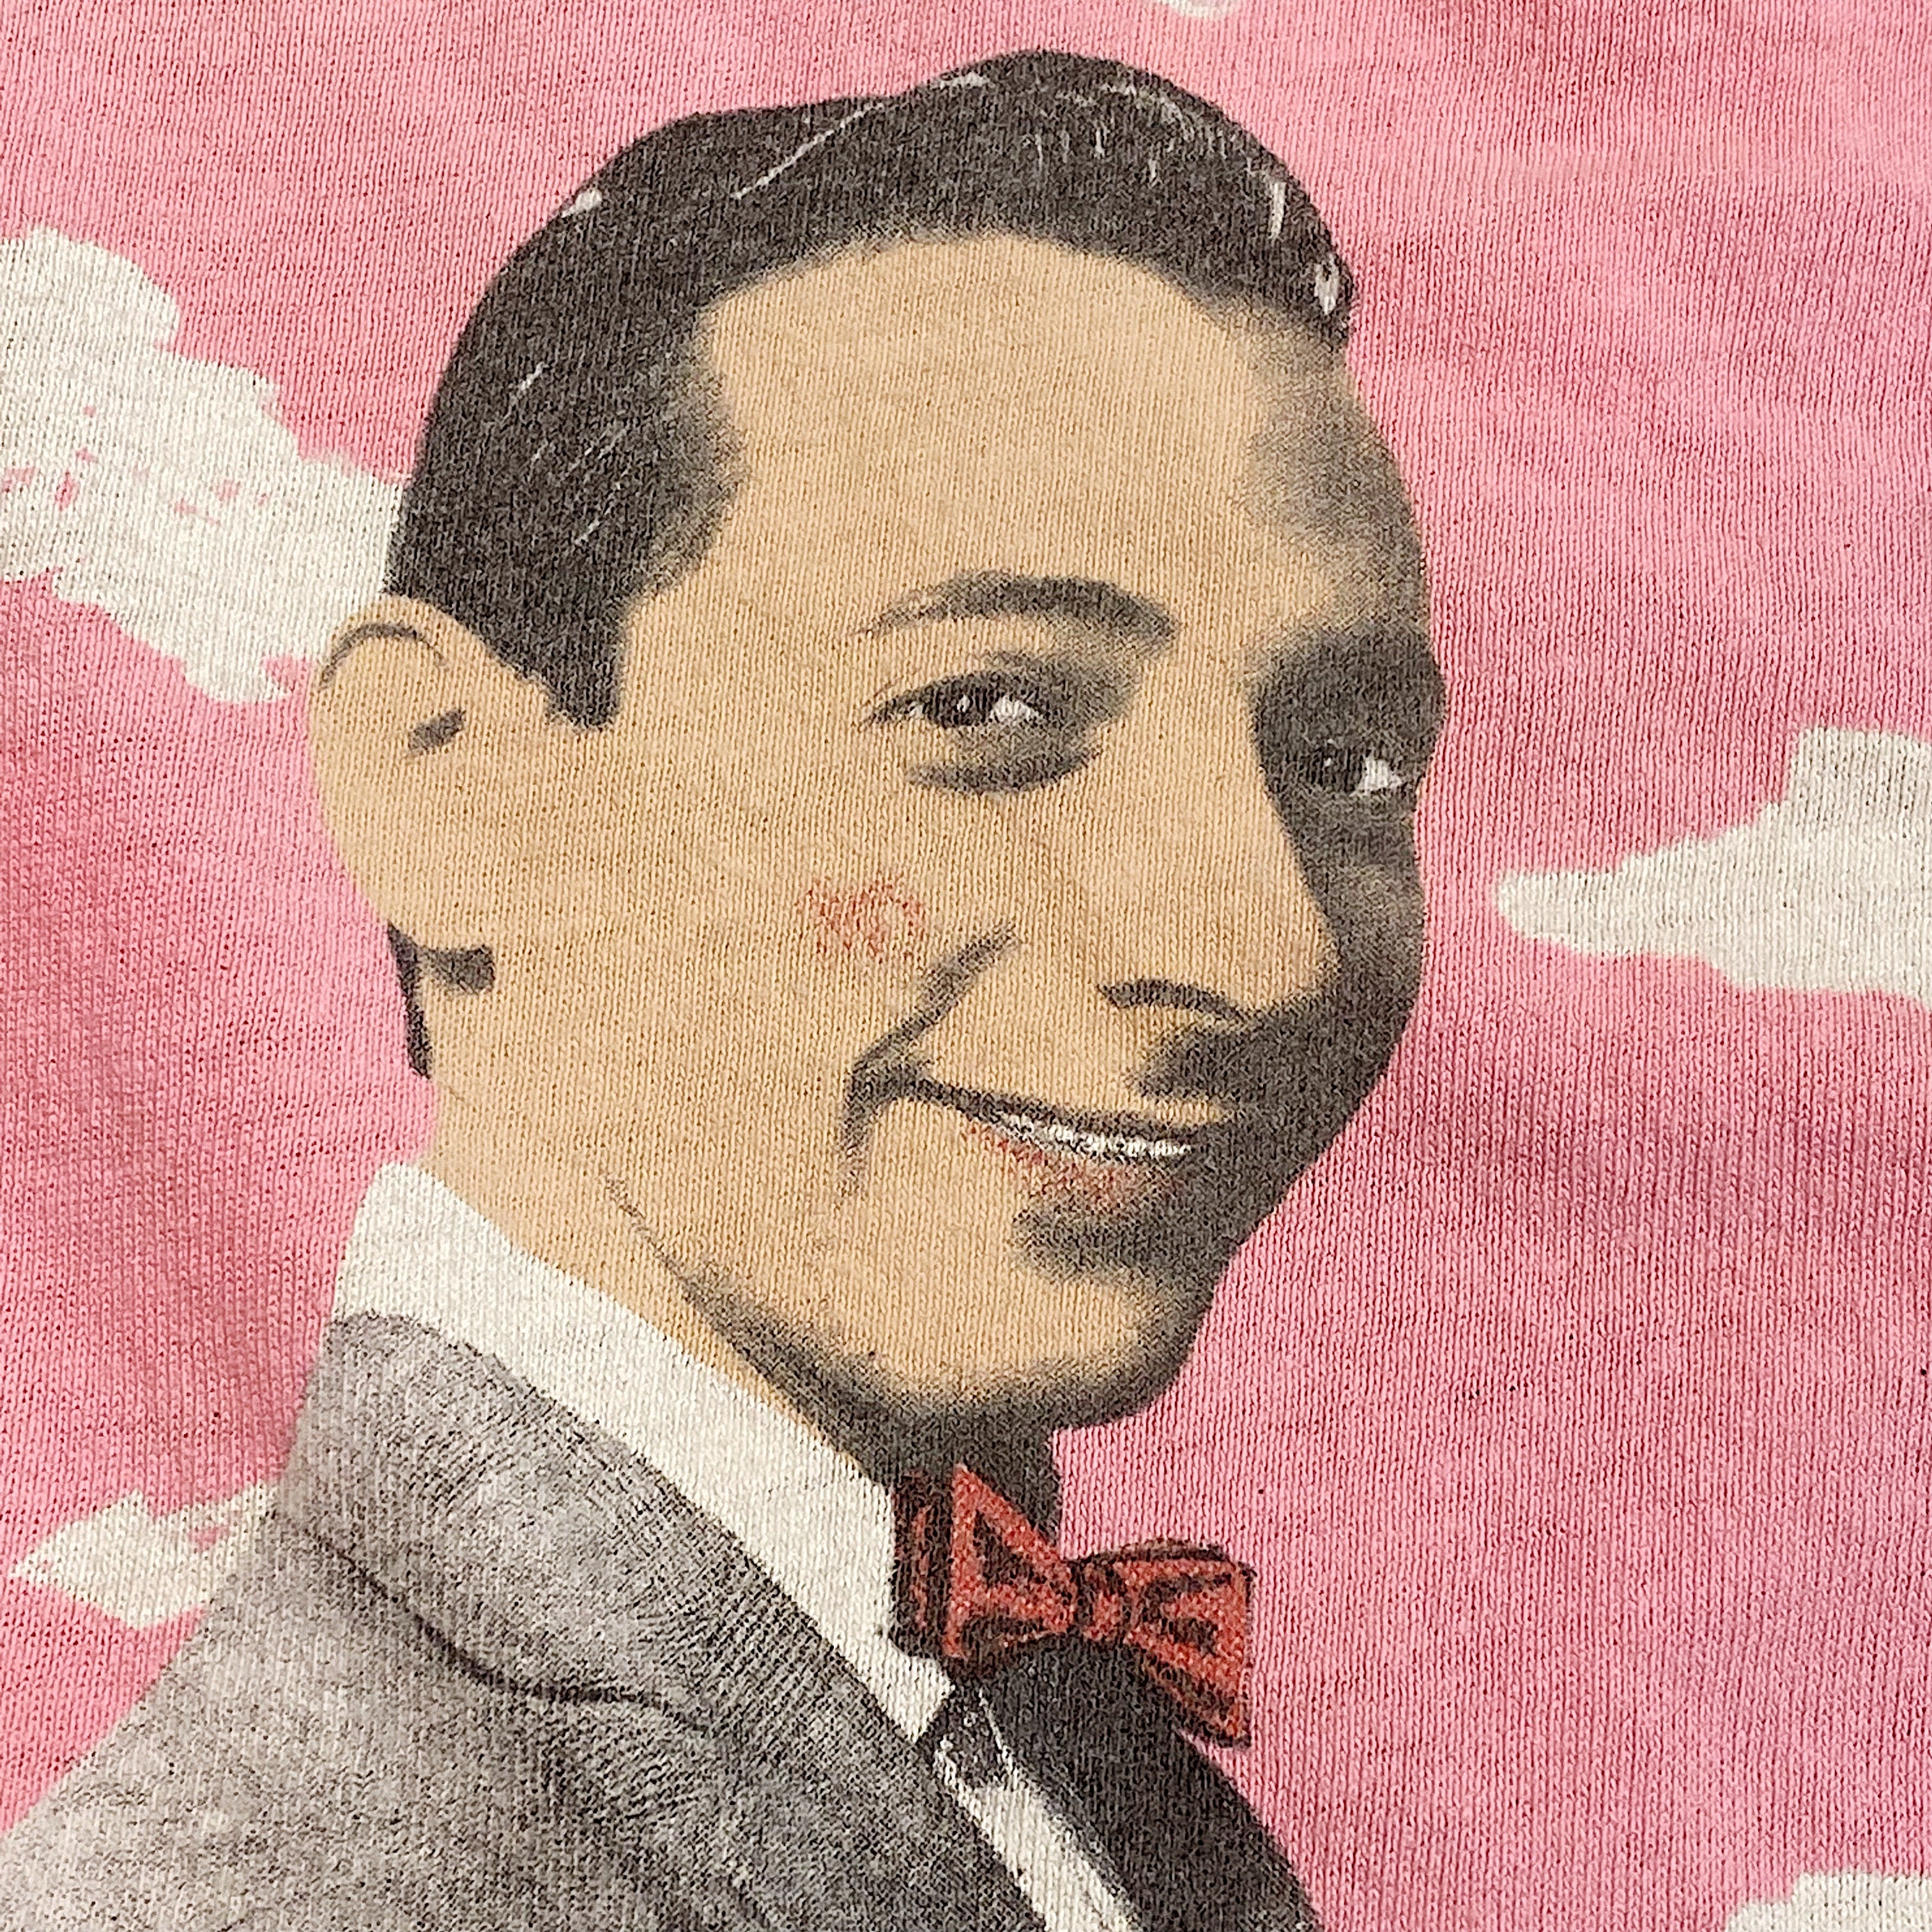 Pose of 1980s Peewee Herman T-Shirt with Hand Painting "Hands" - Vintage Stanley DeSantis Pop Art Shirts - Big Adventure - Large Marge - Playhouse